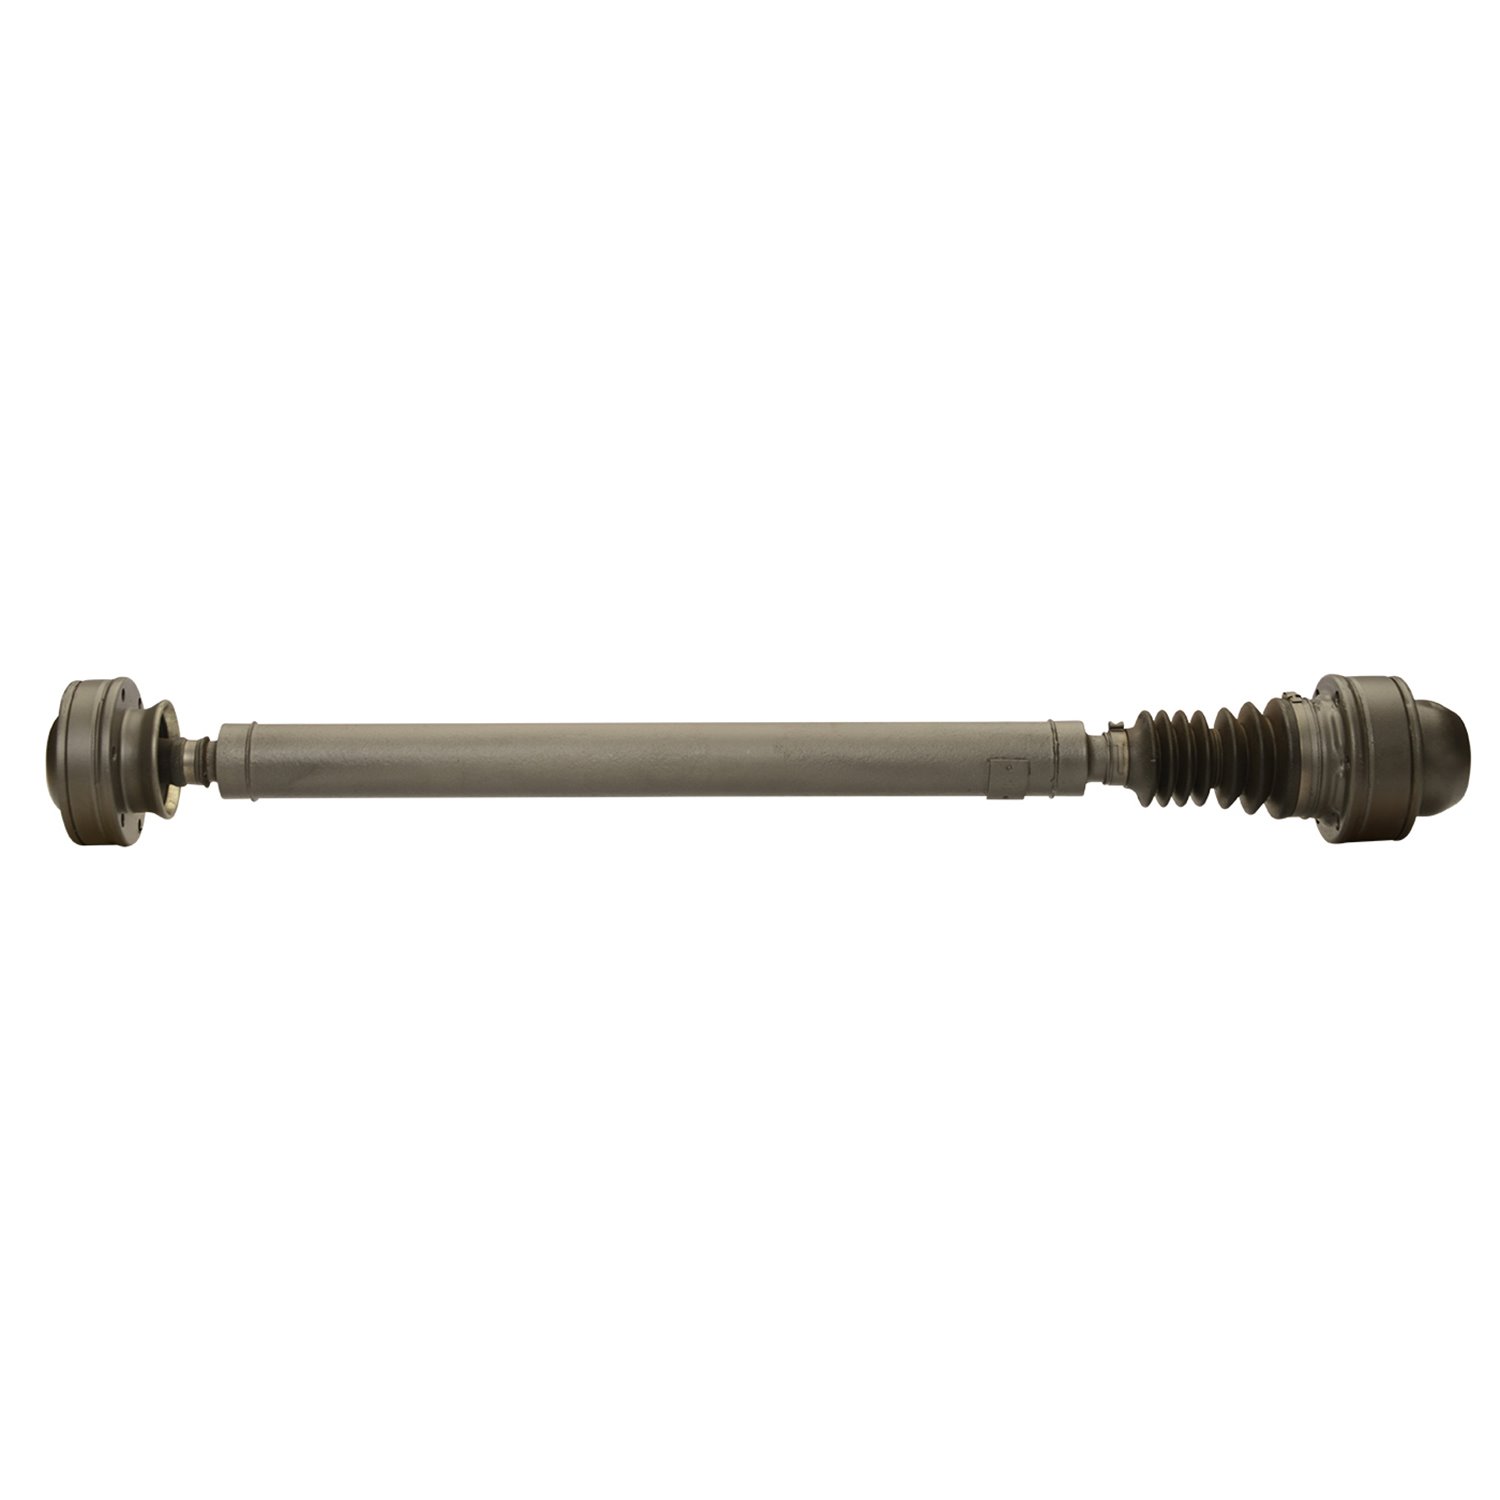 USA Standard ZDS9314 Front Driveshaft, For Grand Cherokee, 20 in. Weld-To-Weld